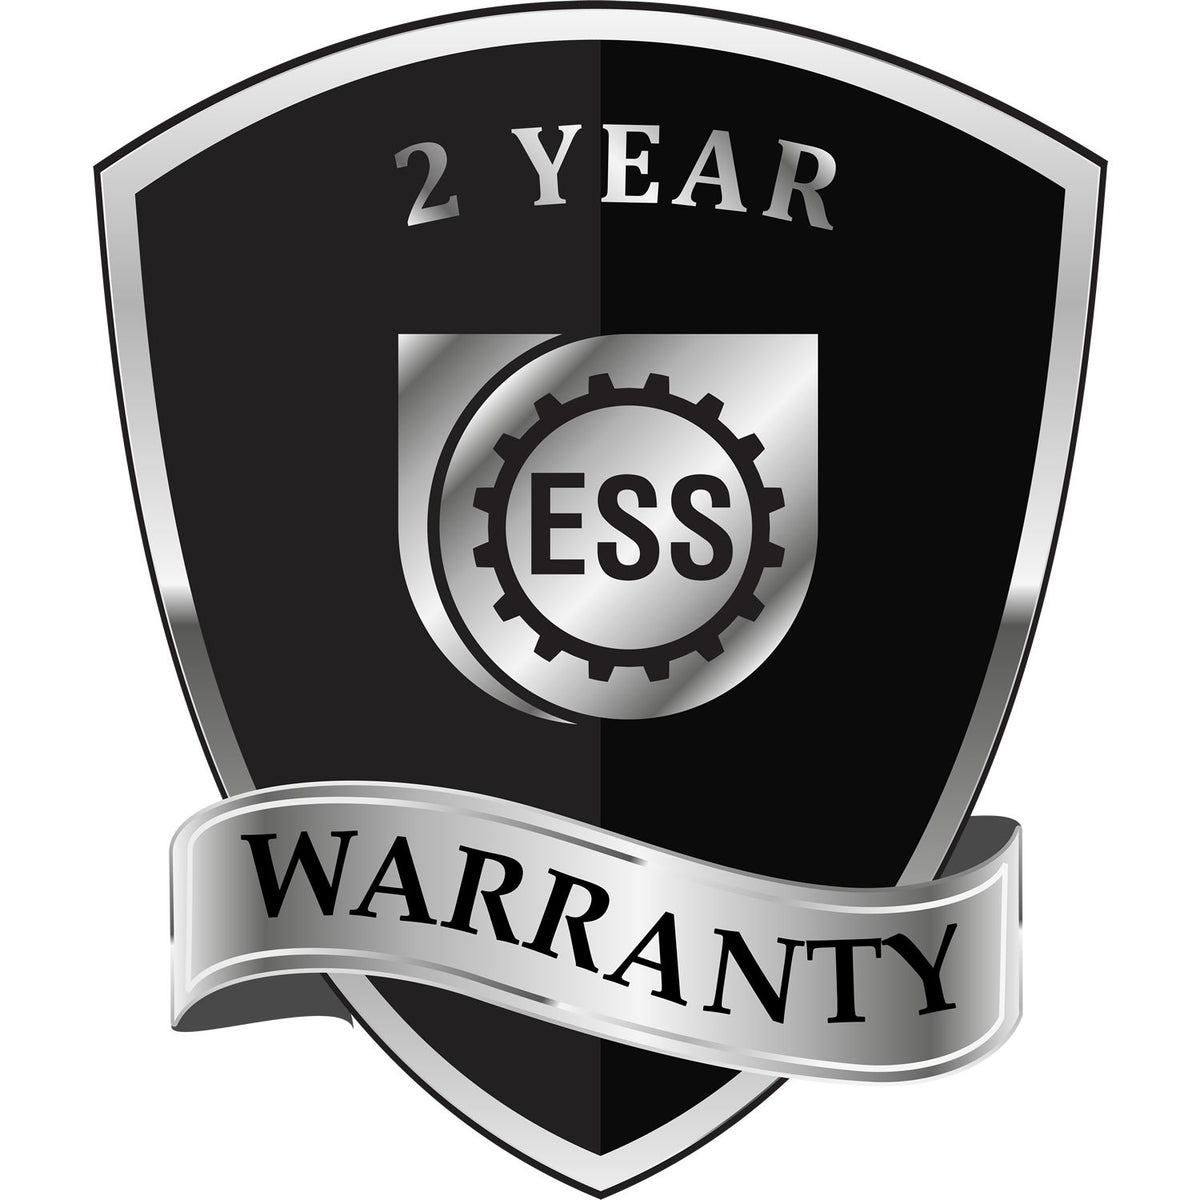 A badge or emblem showing a warranty icon for the Long Reach District of Columbia Land Surveyor Seal